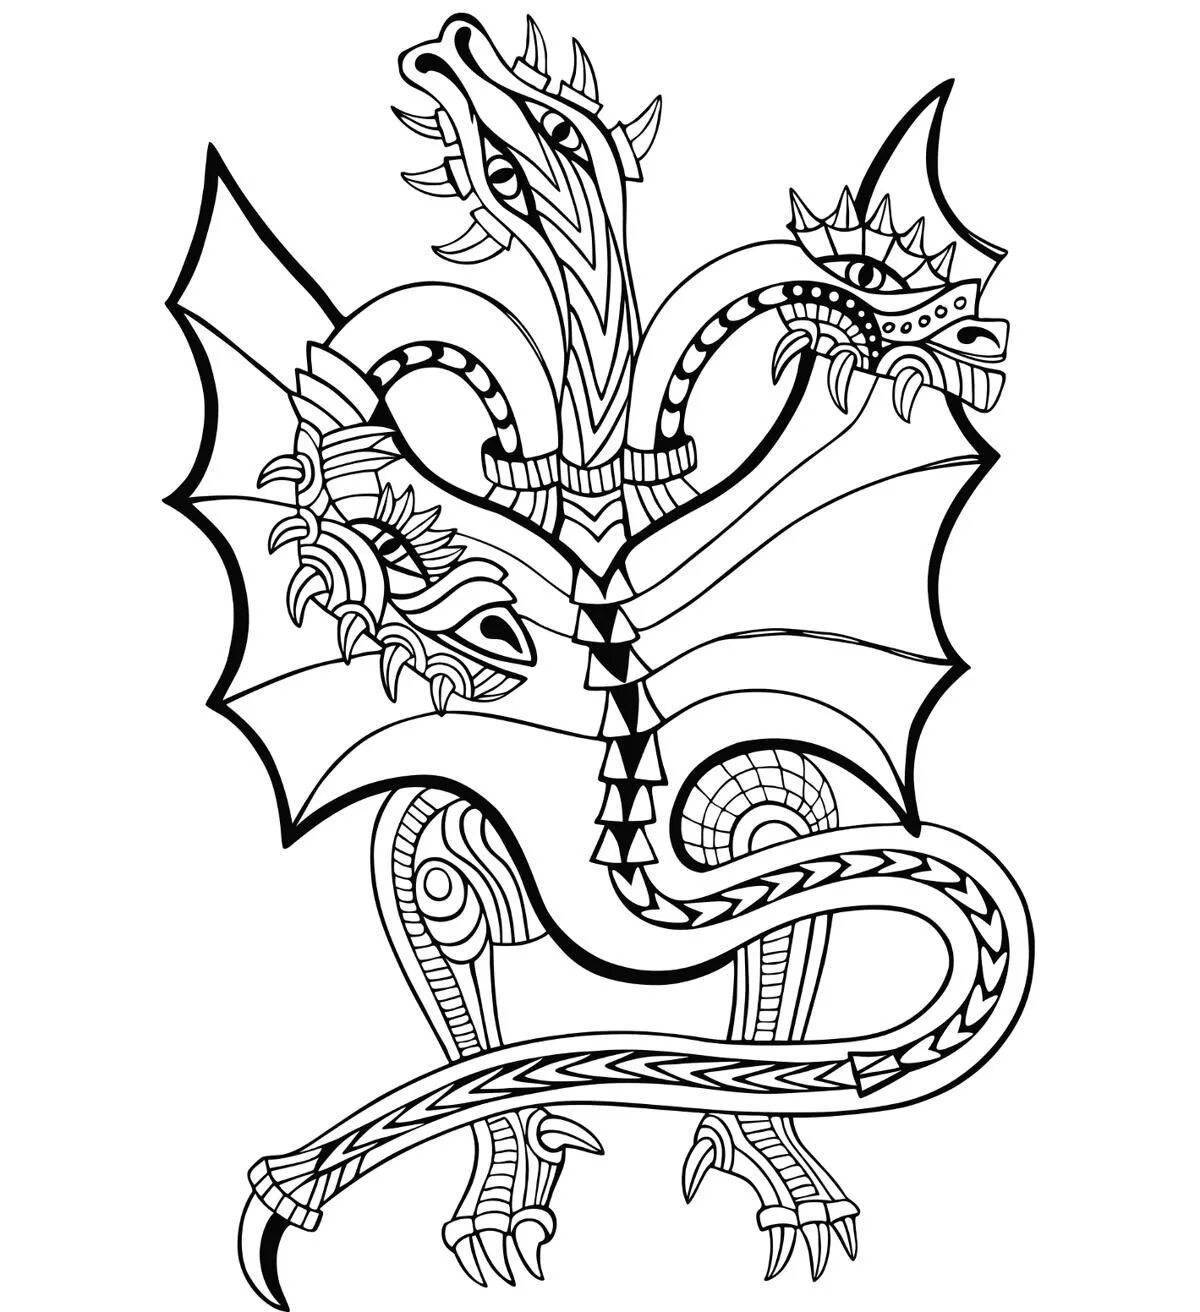 Generous three-headed dragon coloring page